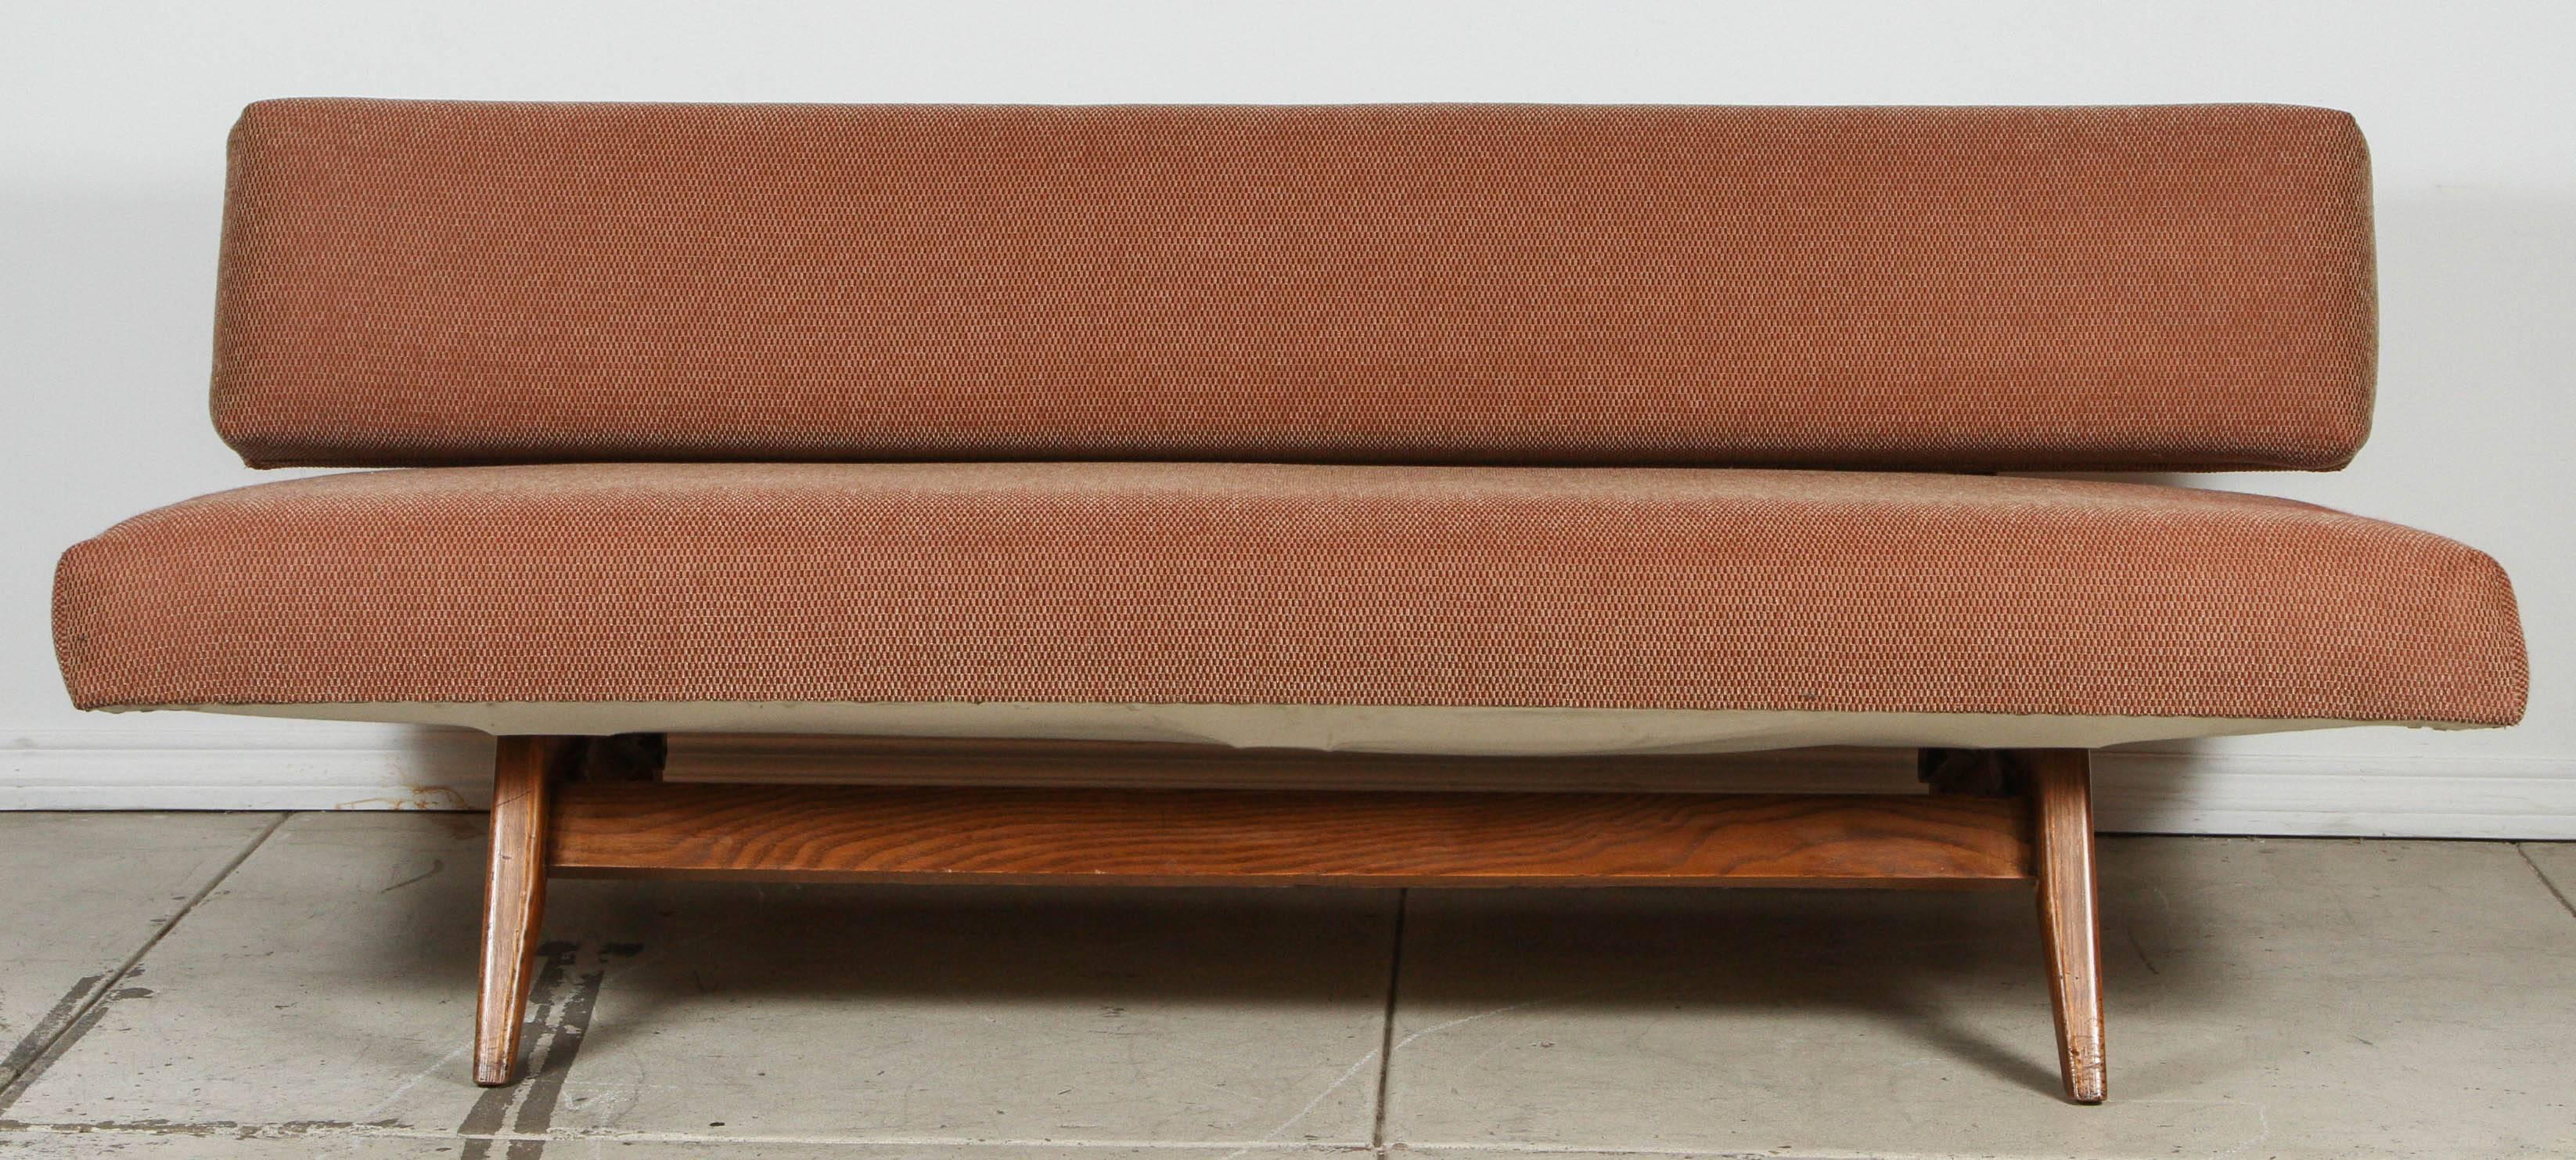 Case study style, upholstered daybed in the manner of Karl Ekselius and Richard Stein. Seat pulls forward to expose a twin size sleeper. Beautiful original condition.